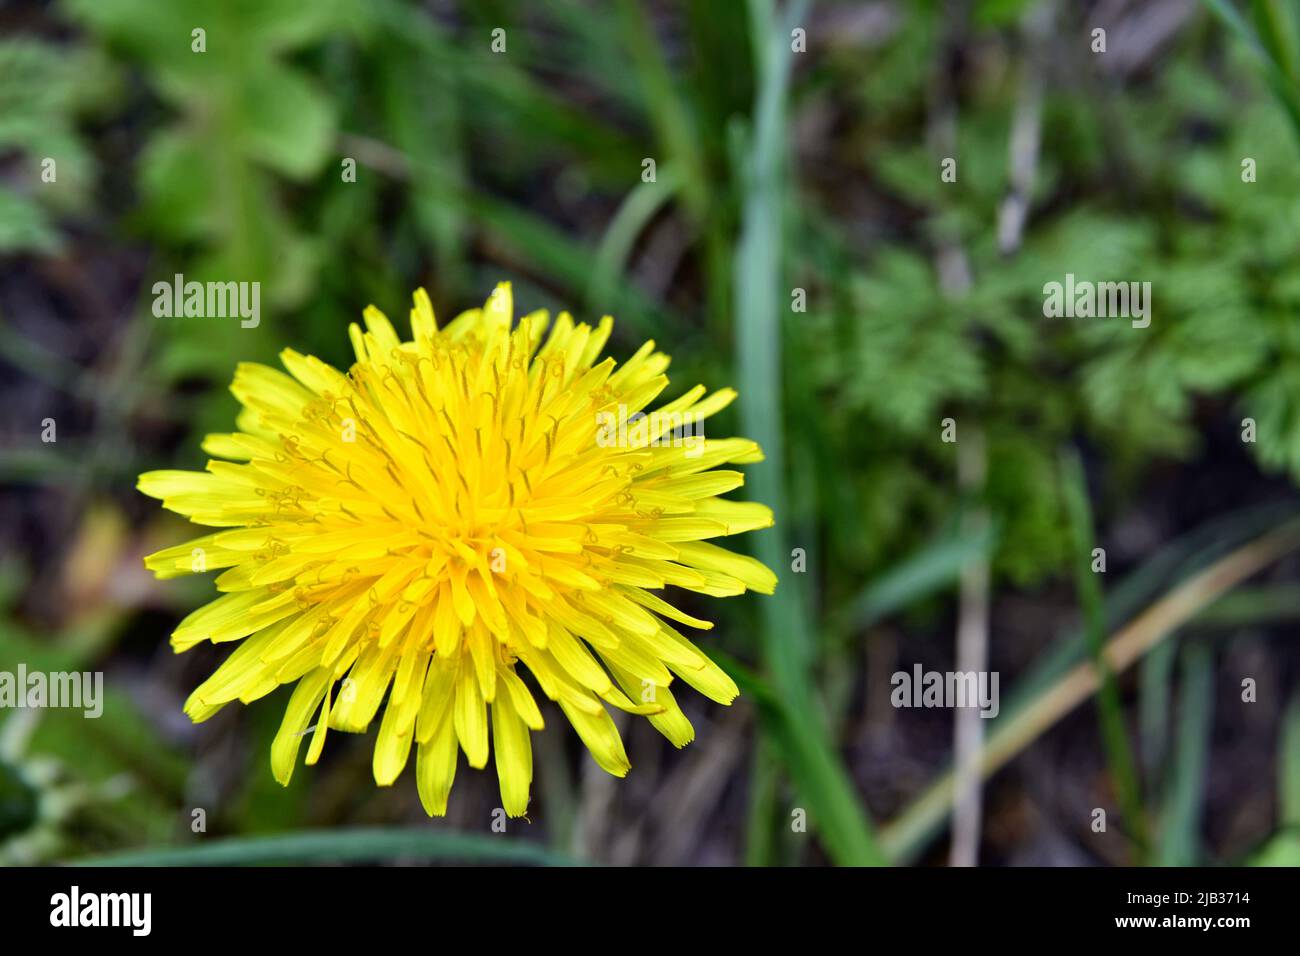 Dandelion colouring the meadow in springtime Stock Photo